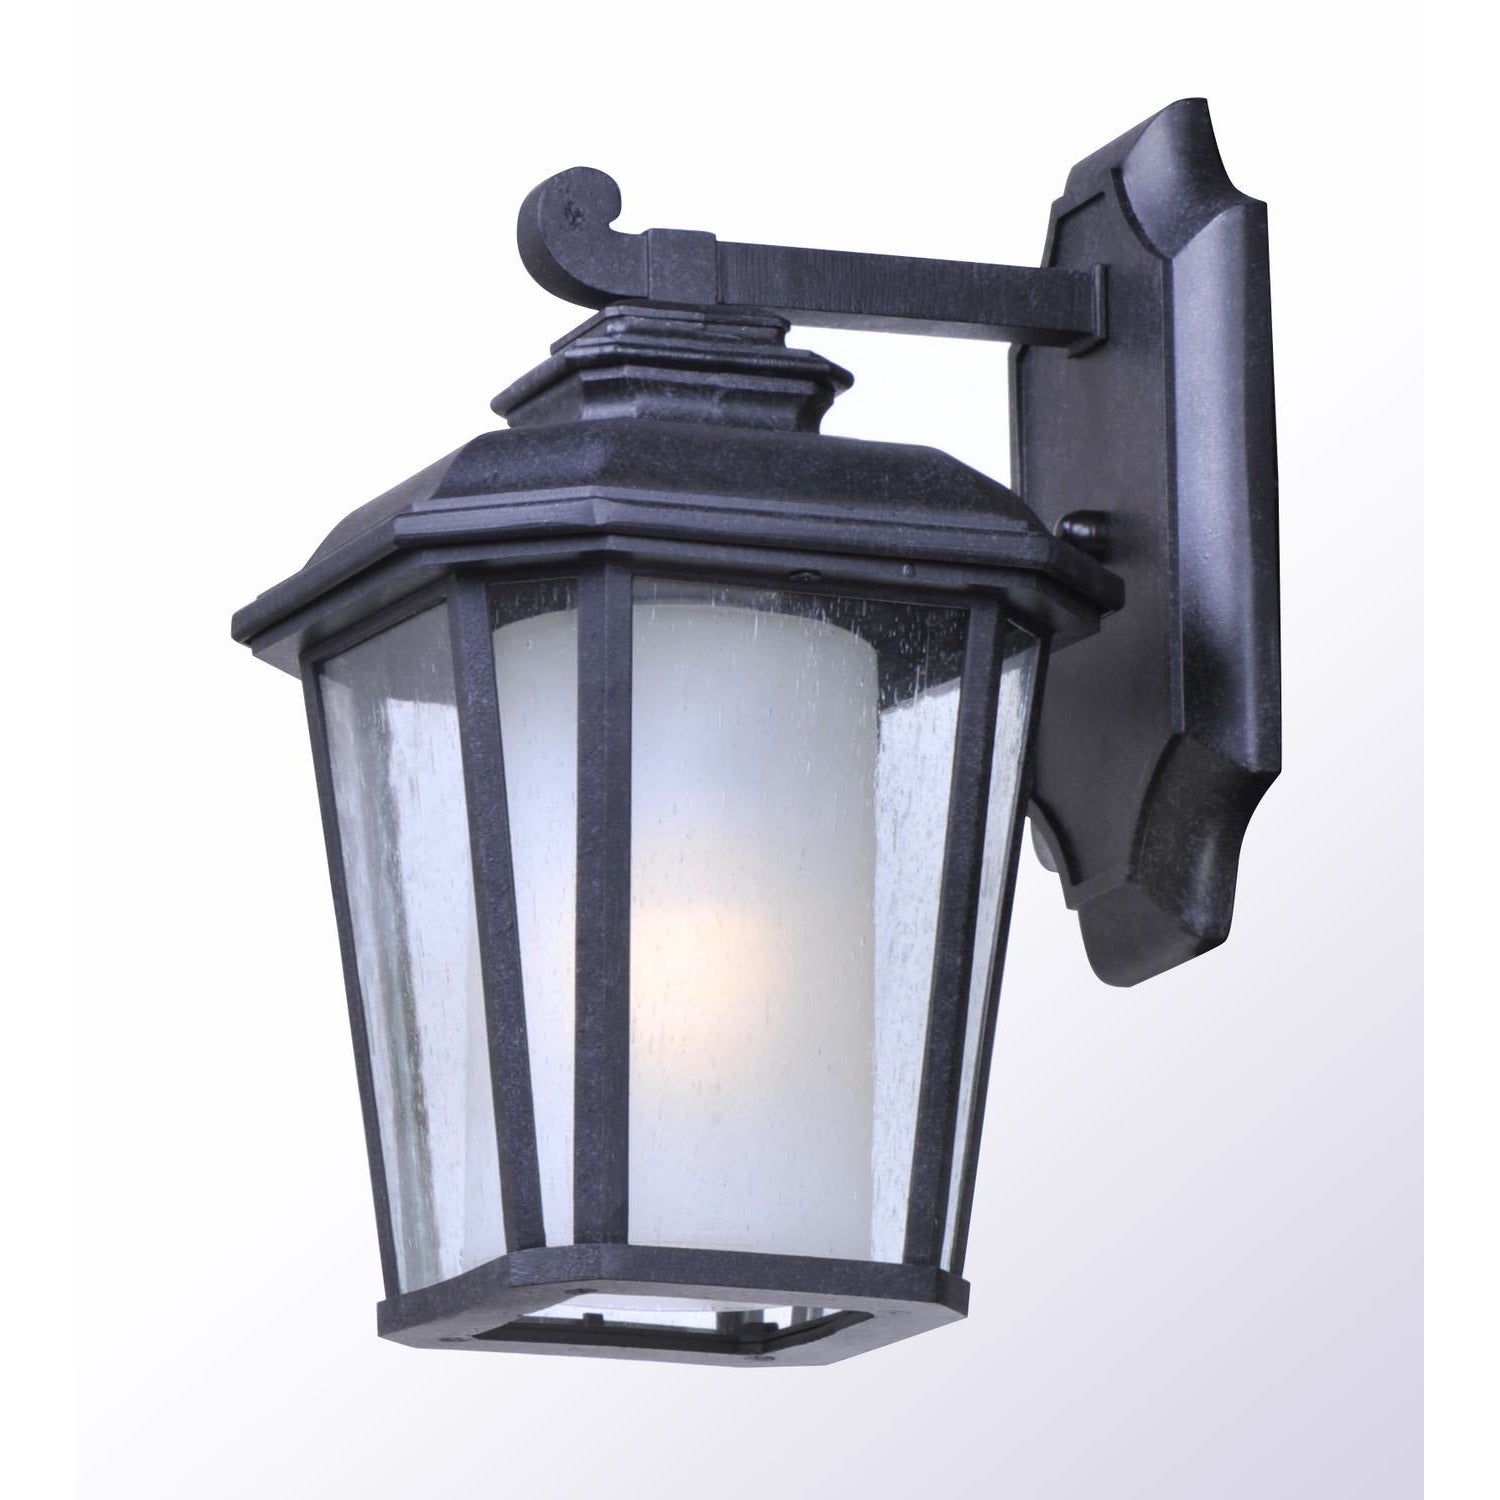 Radcliffe EE (Disc) Outdoor Wall Light Black Oxide